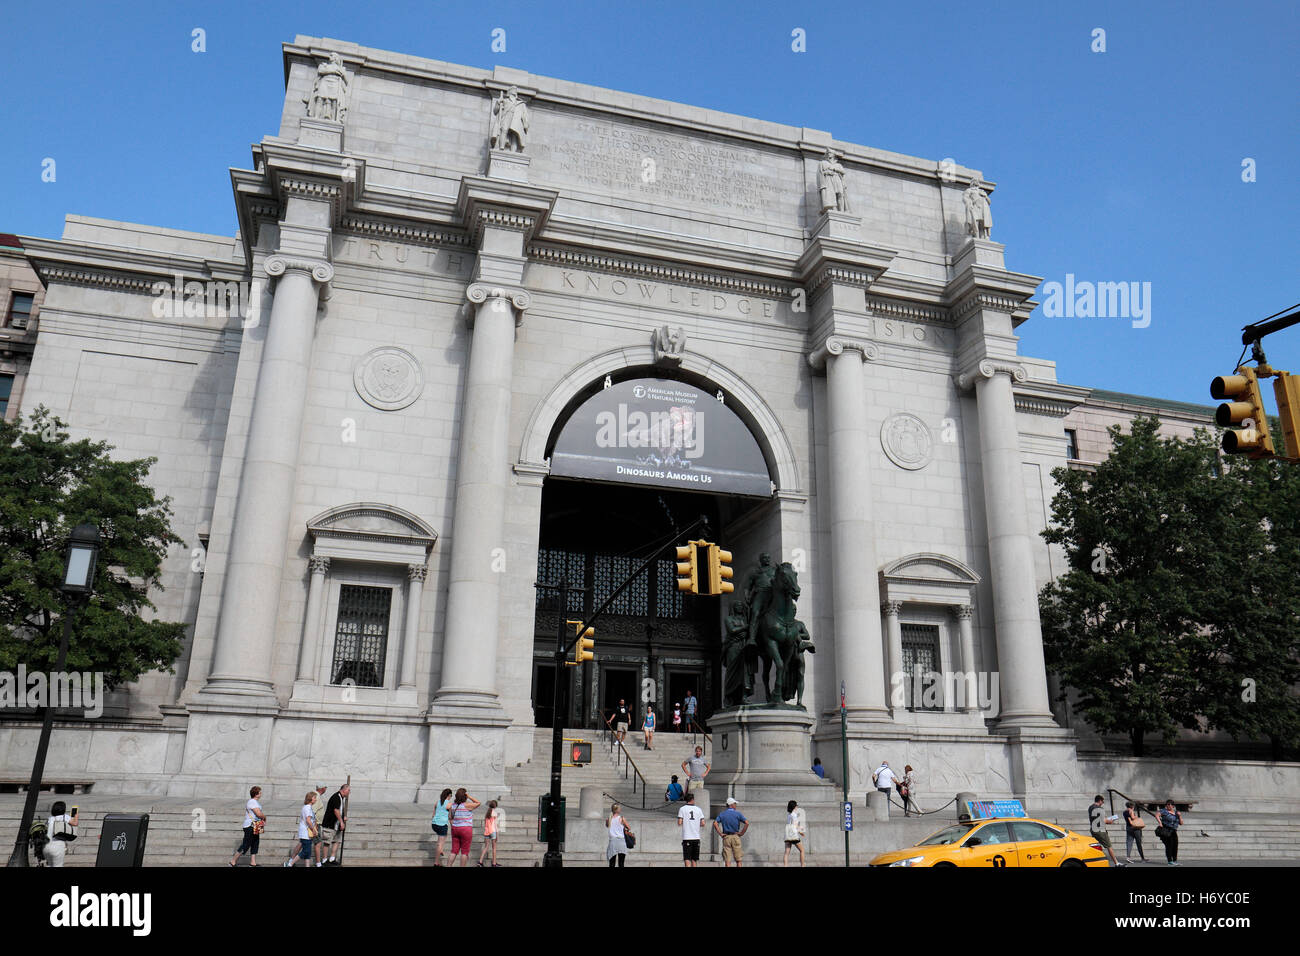 The American Museum of Natural History in Manhattan, New York, United States. Stock Photo